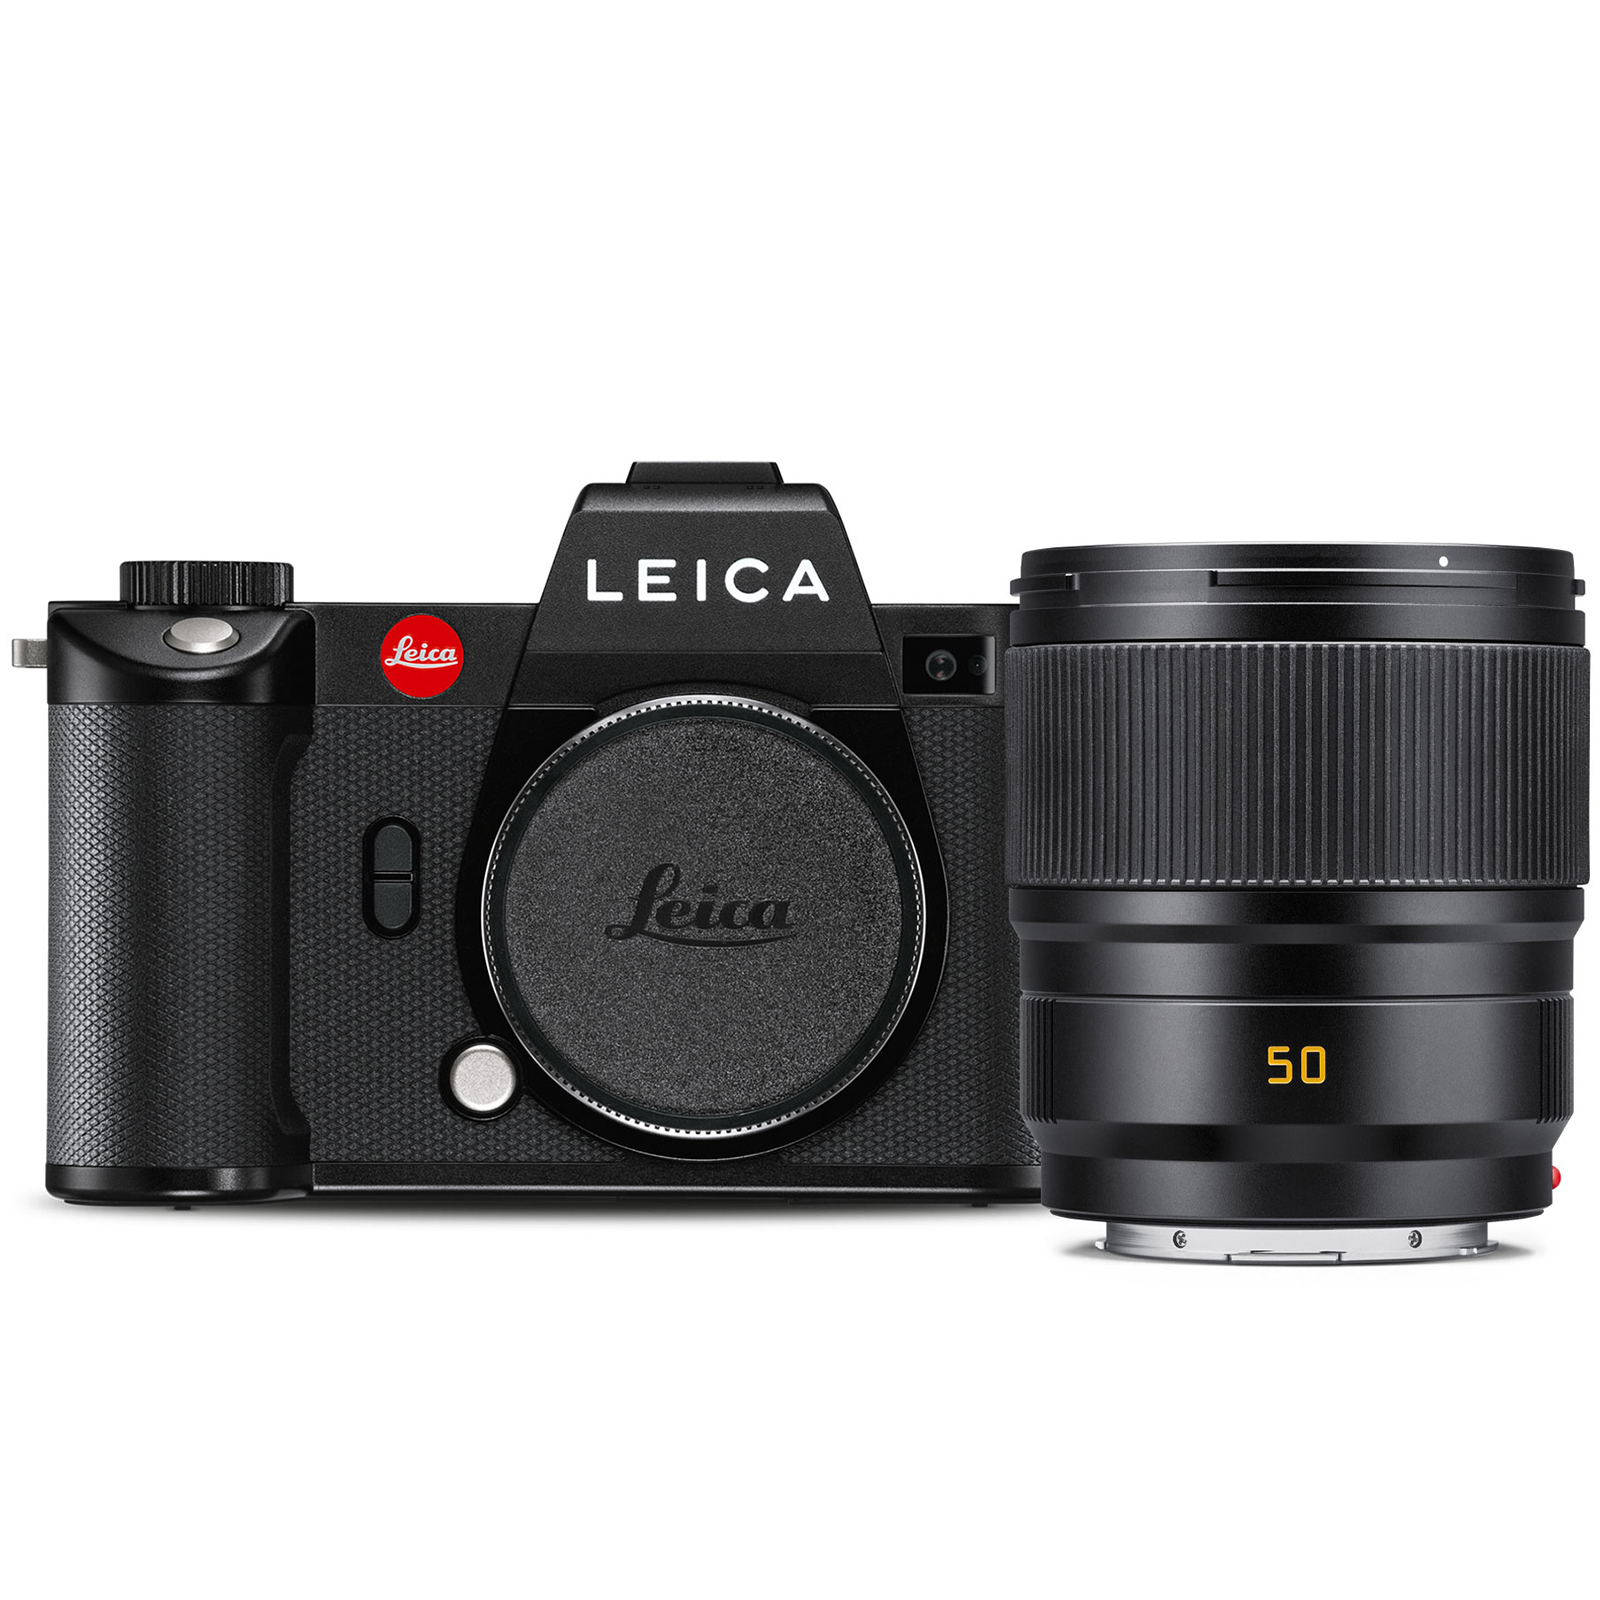 Image of Leica SL2 Digital Camera with 50mm f2 SummicronSL ASPH Lens